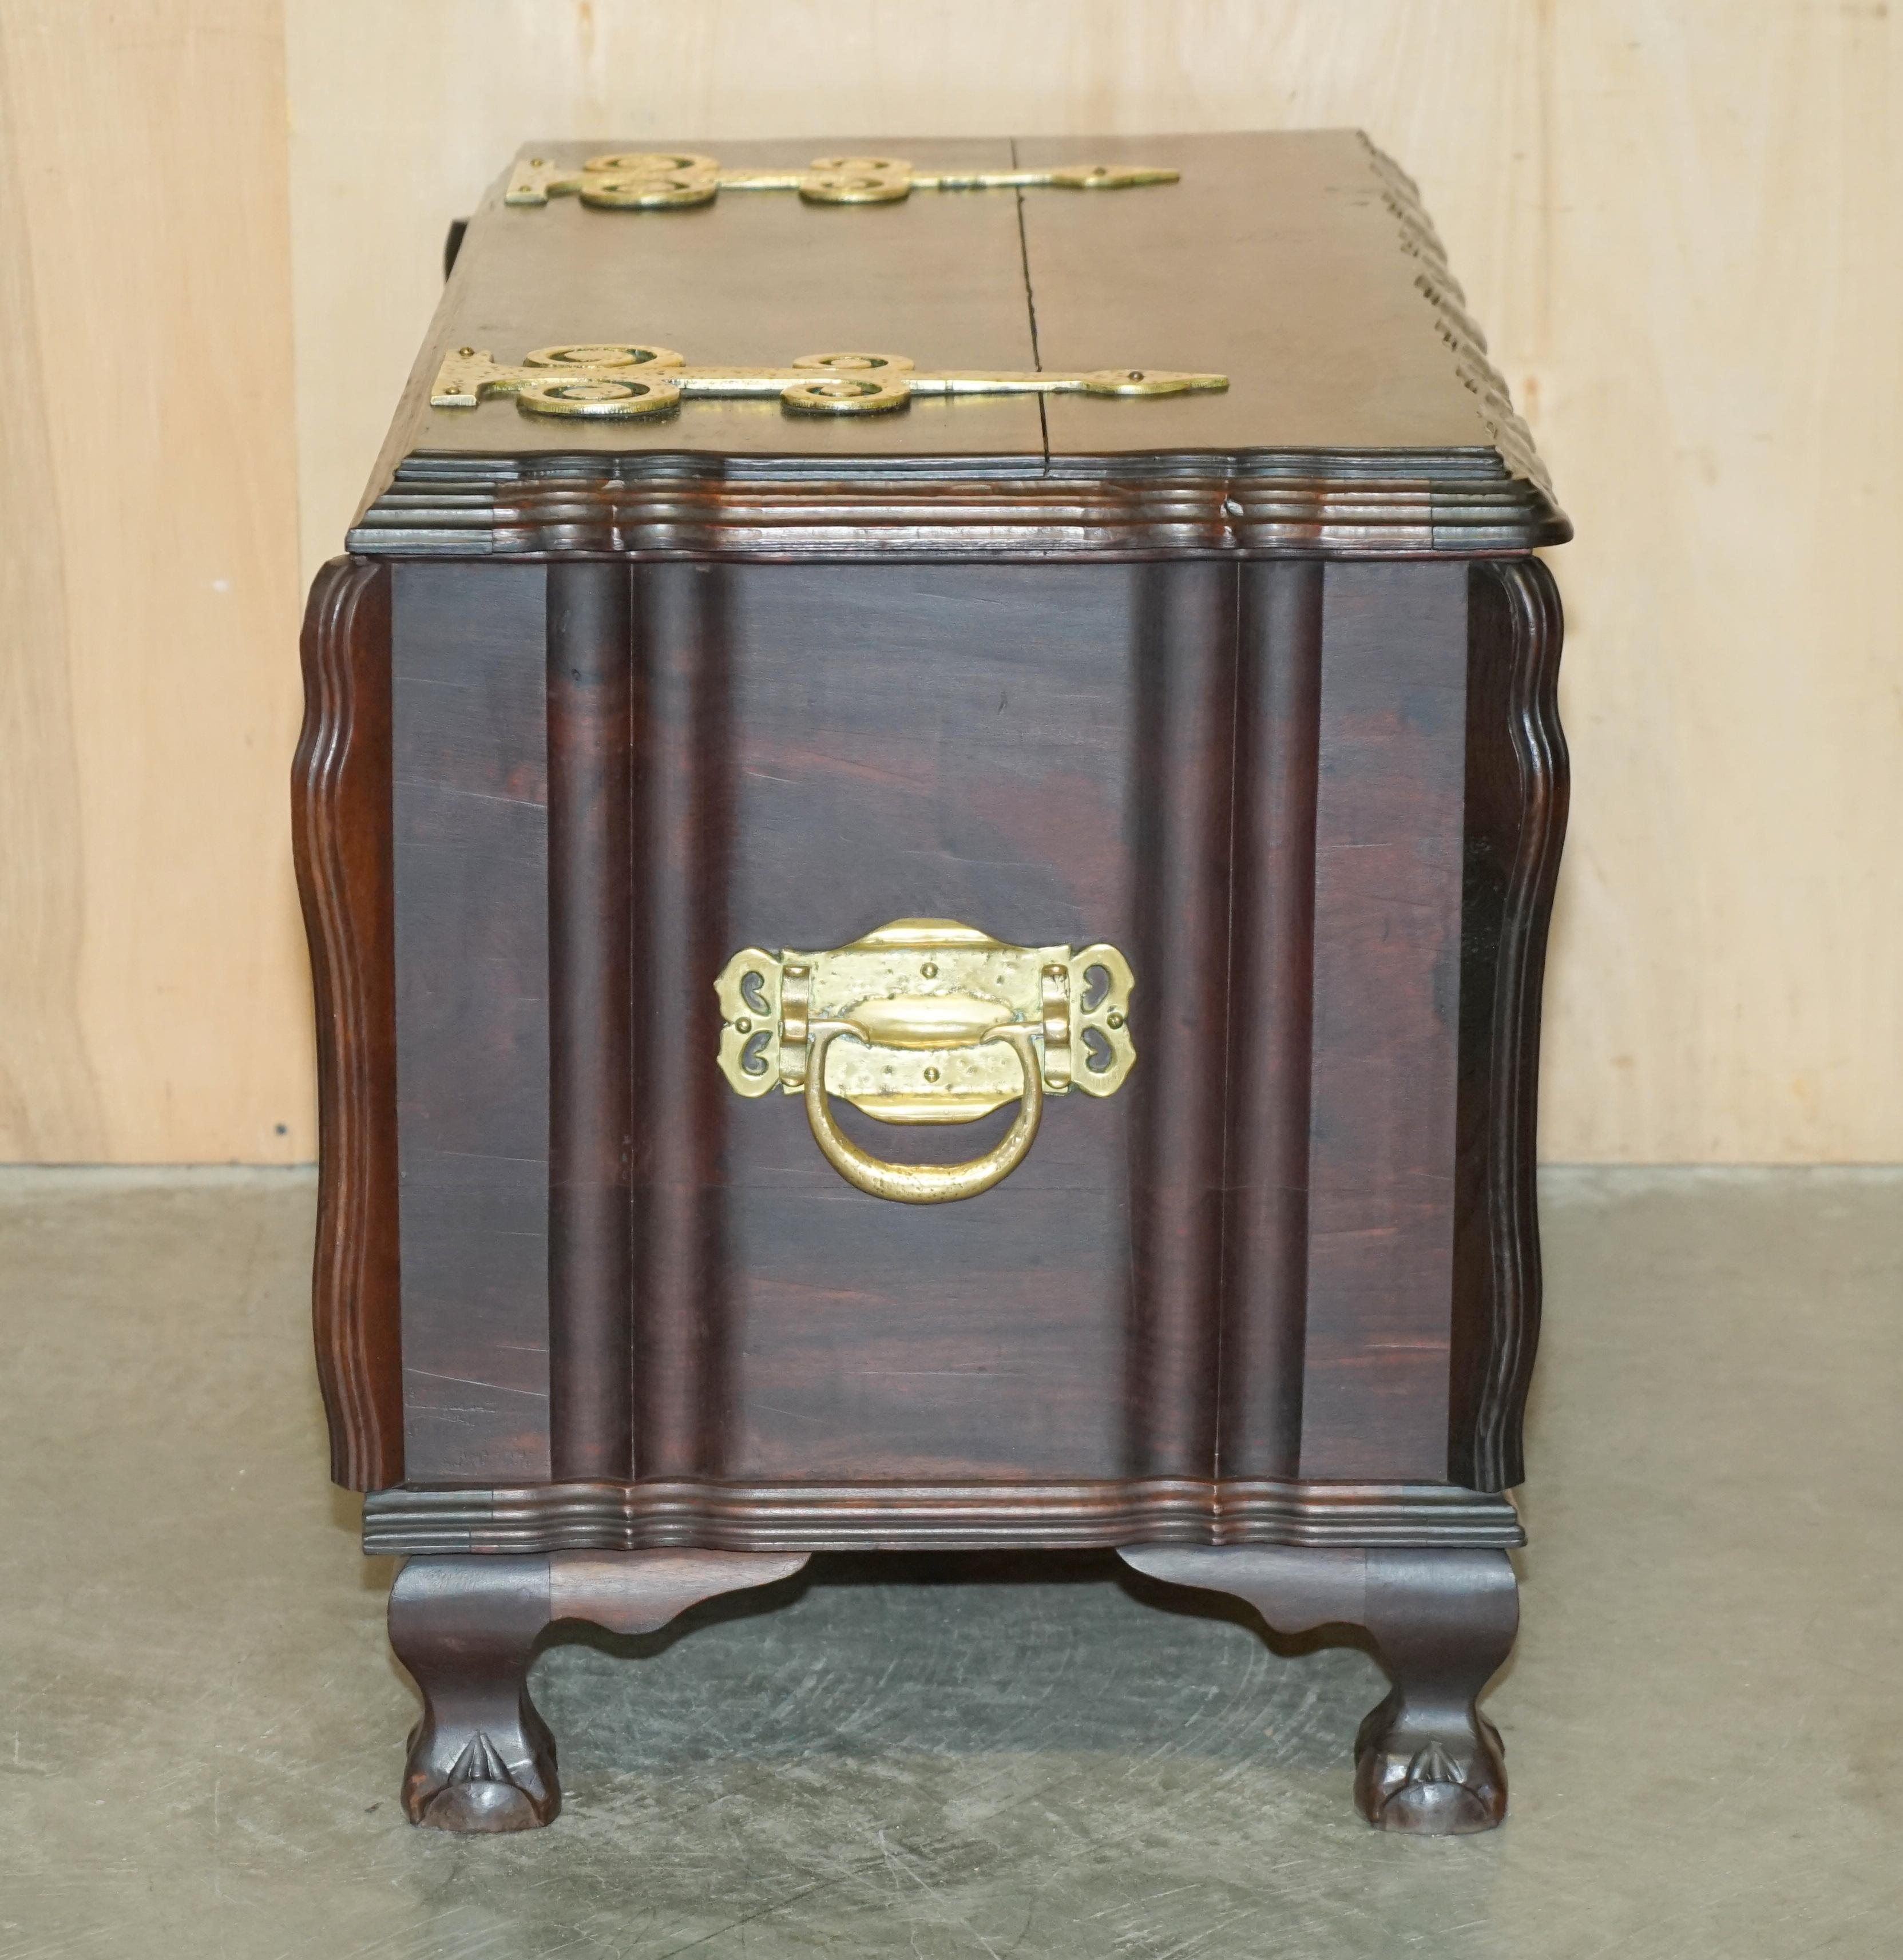 ViNTAGE HAND CARved HARDWOOD TRUNK OR CHEST WITH ORNATE OVERSIZED BRASS FITTINGS im Angebot 6